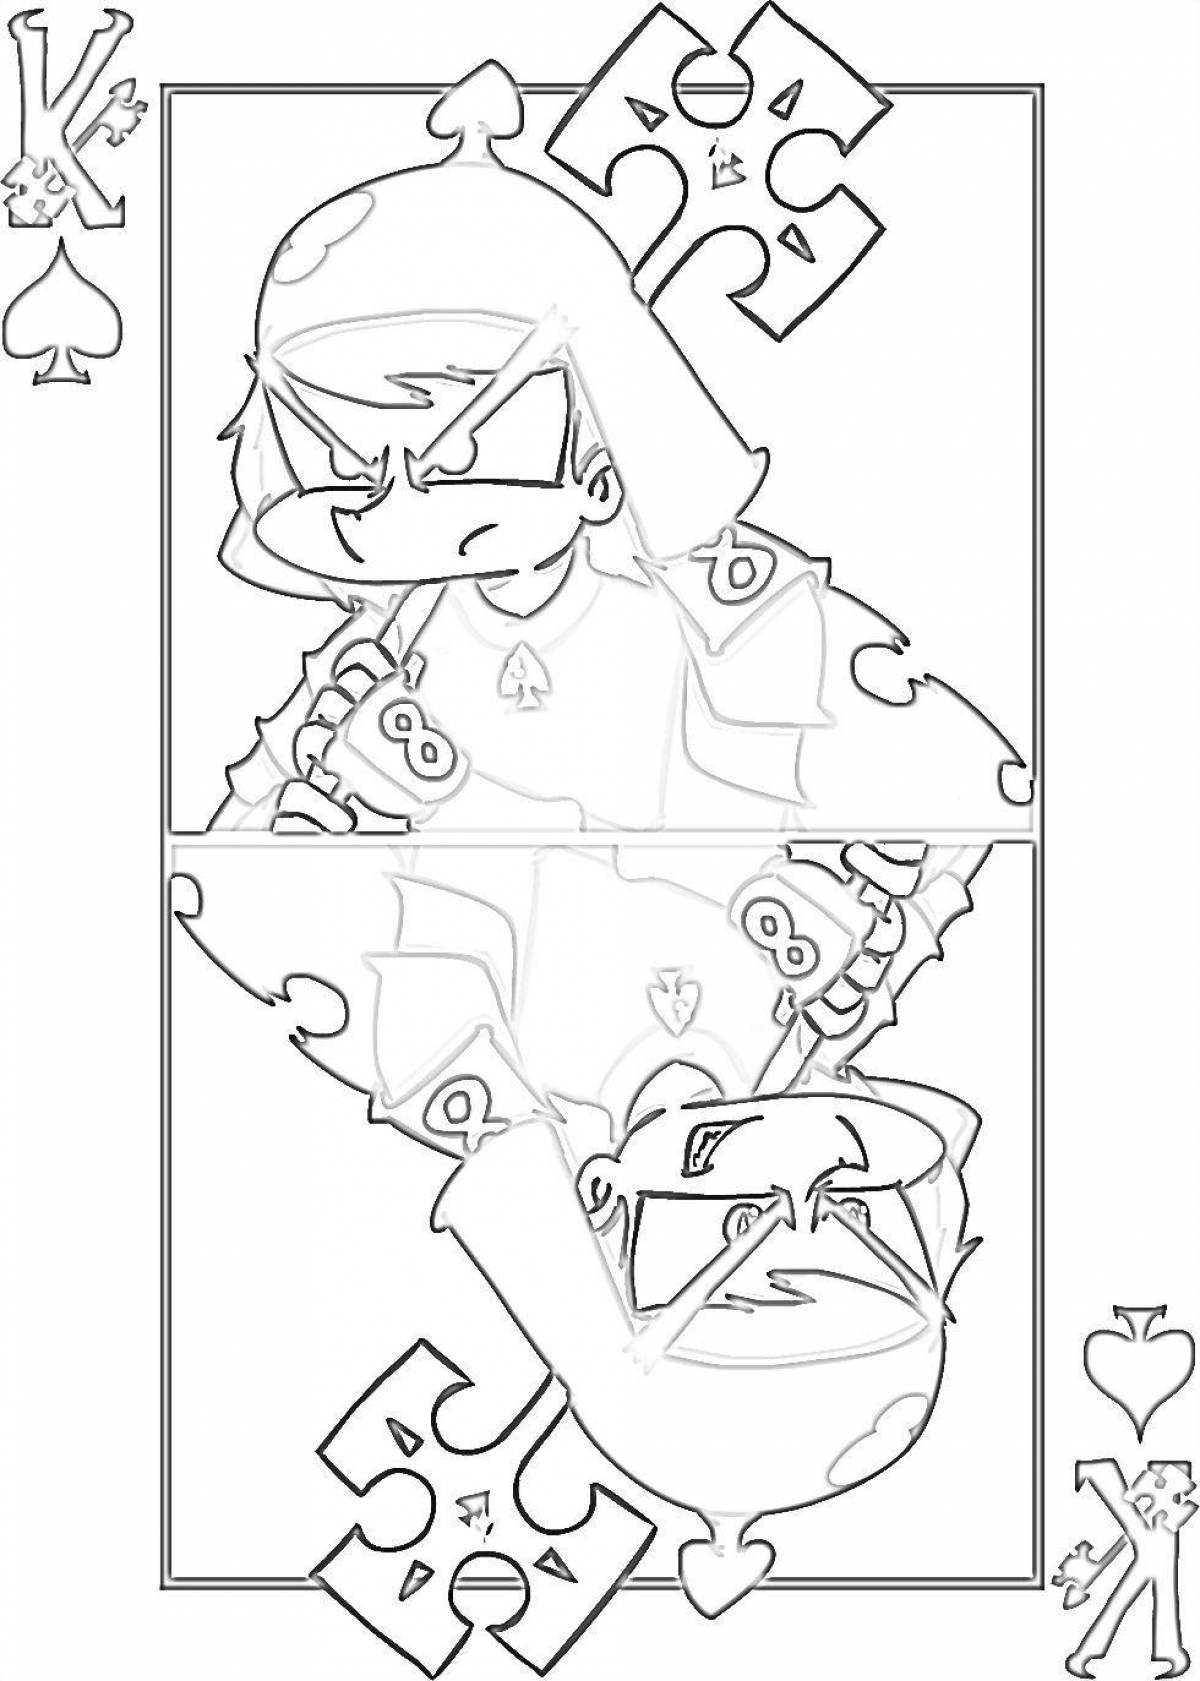 Funny clones 13 coloring cards